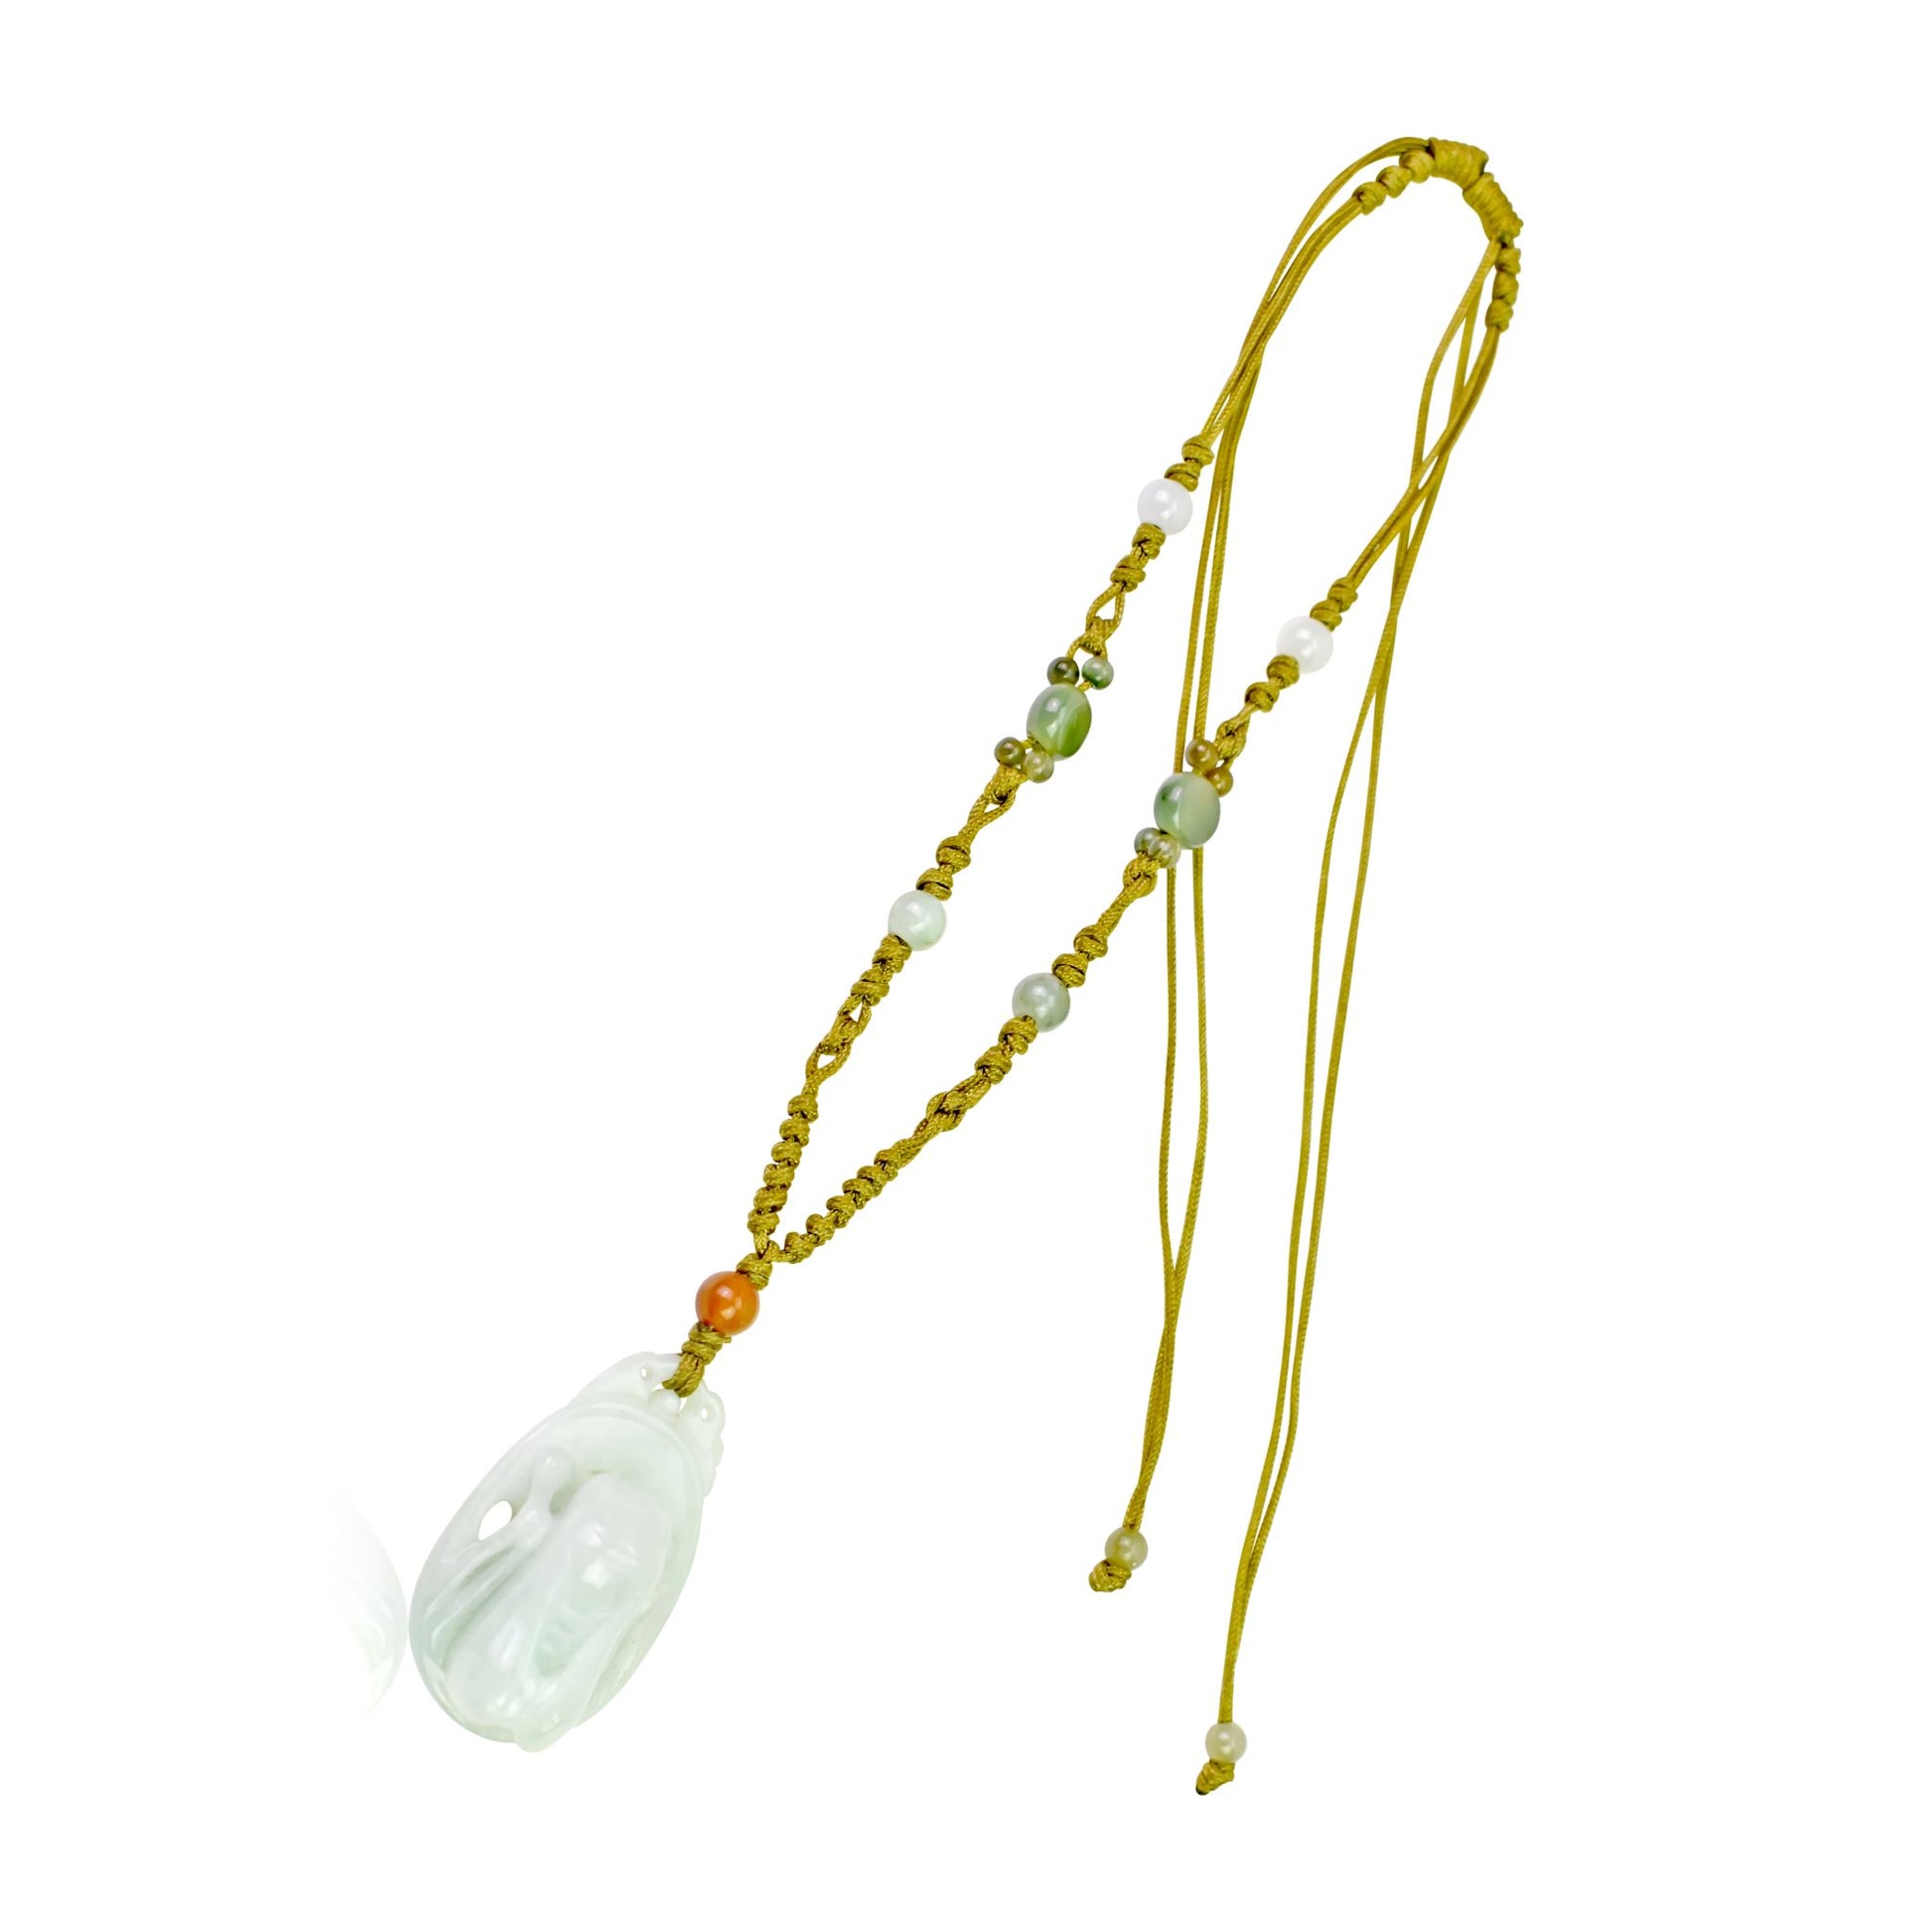 Achieve Boldness and Confidence with a Grasshopper Jade Necklace